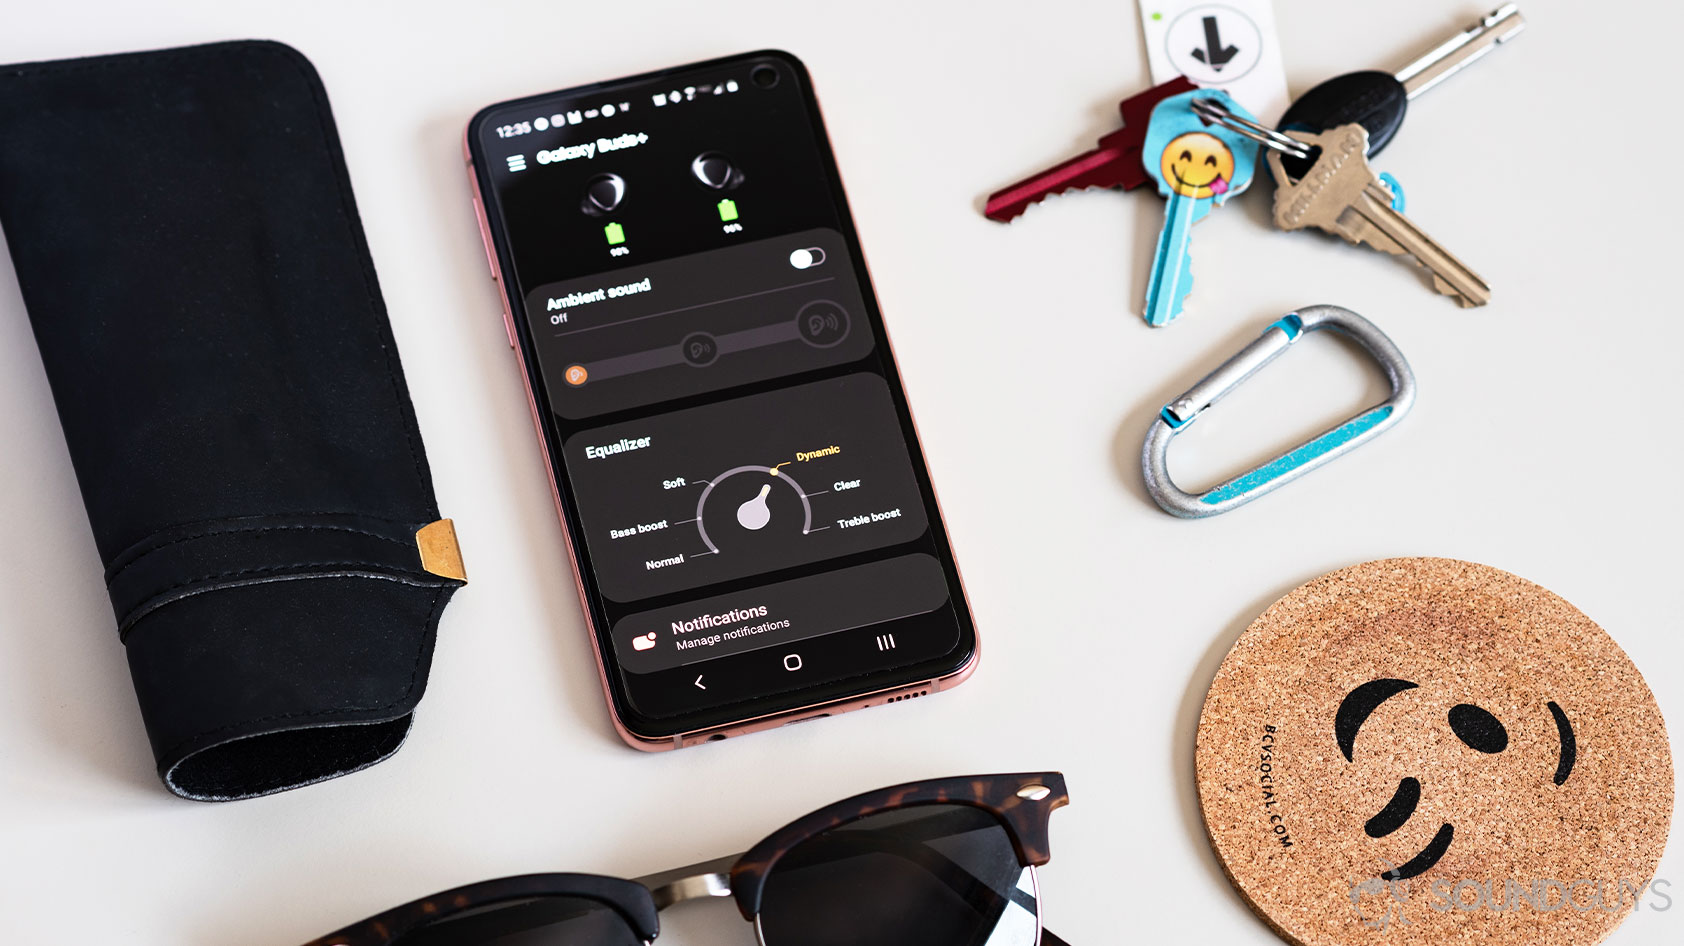 The Samsung Galaxy Buds Plus Wearable app pulled up on a Samsung Galaxy S10e smartphone.